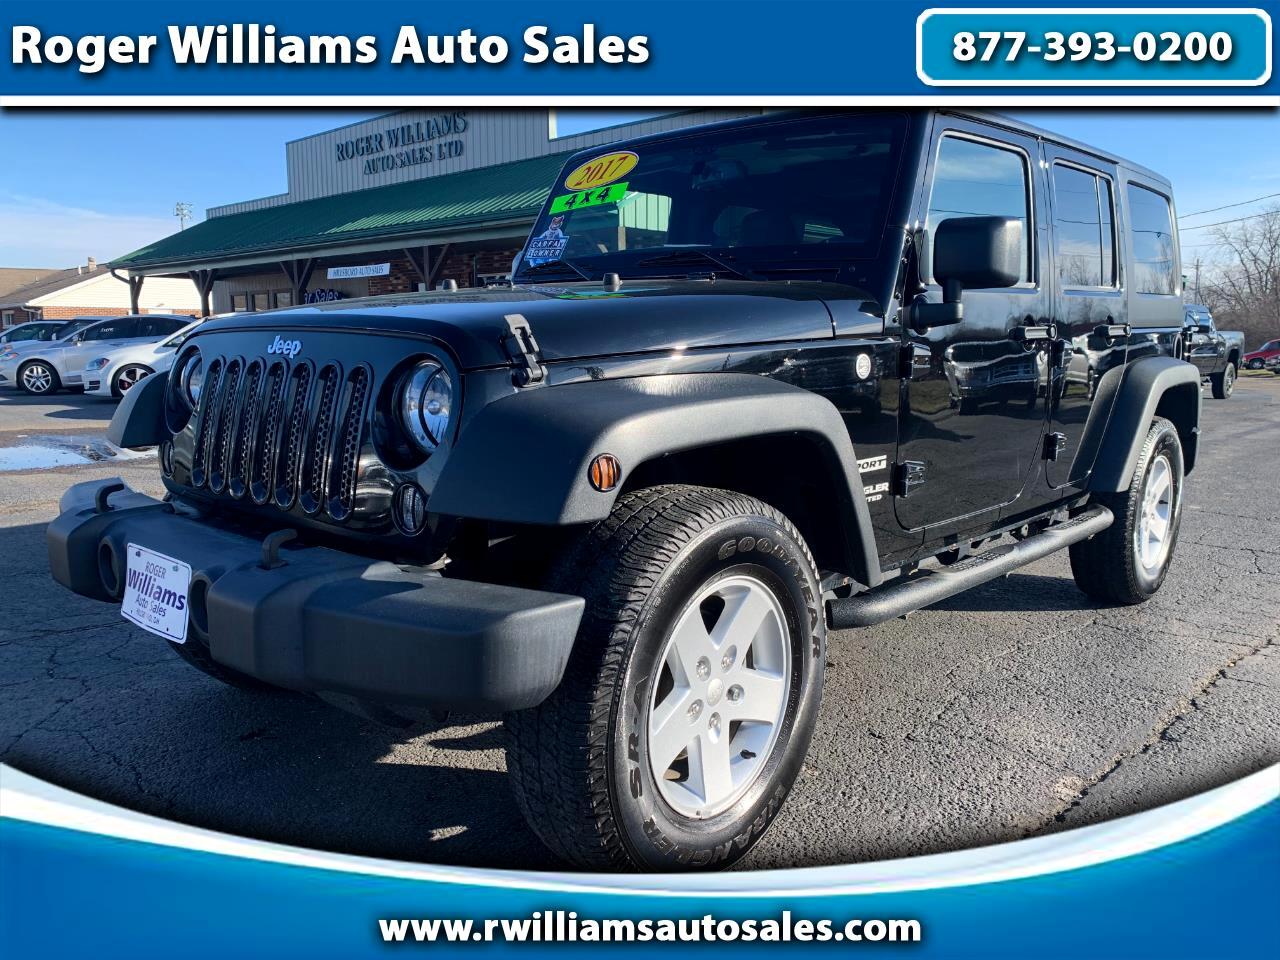 Used Cars for Sale Hillsboro OH 45133 Roger Williams Auto Sales